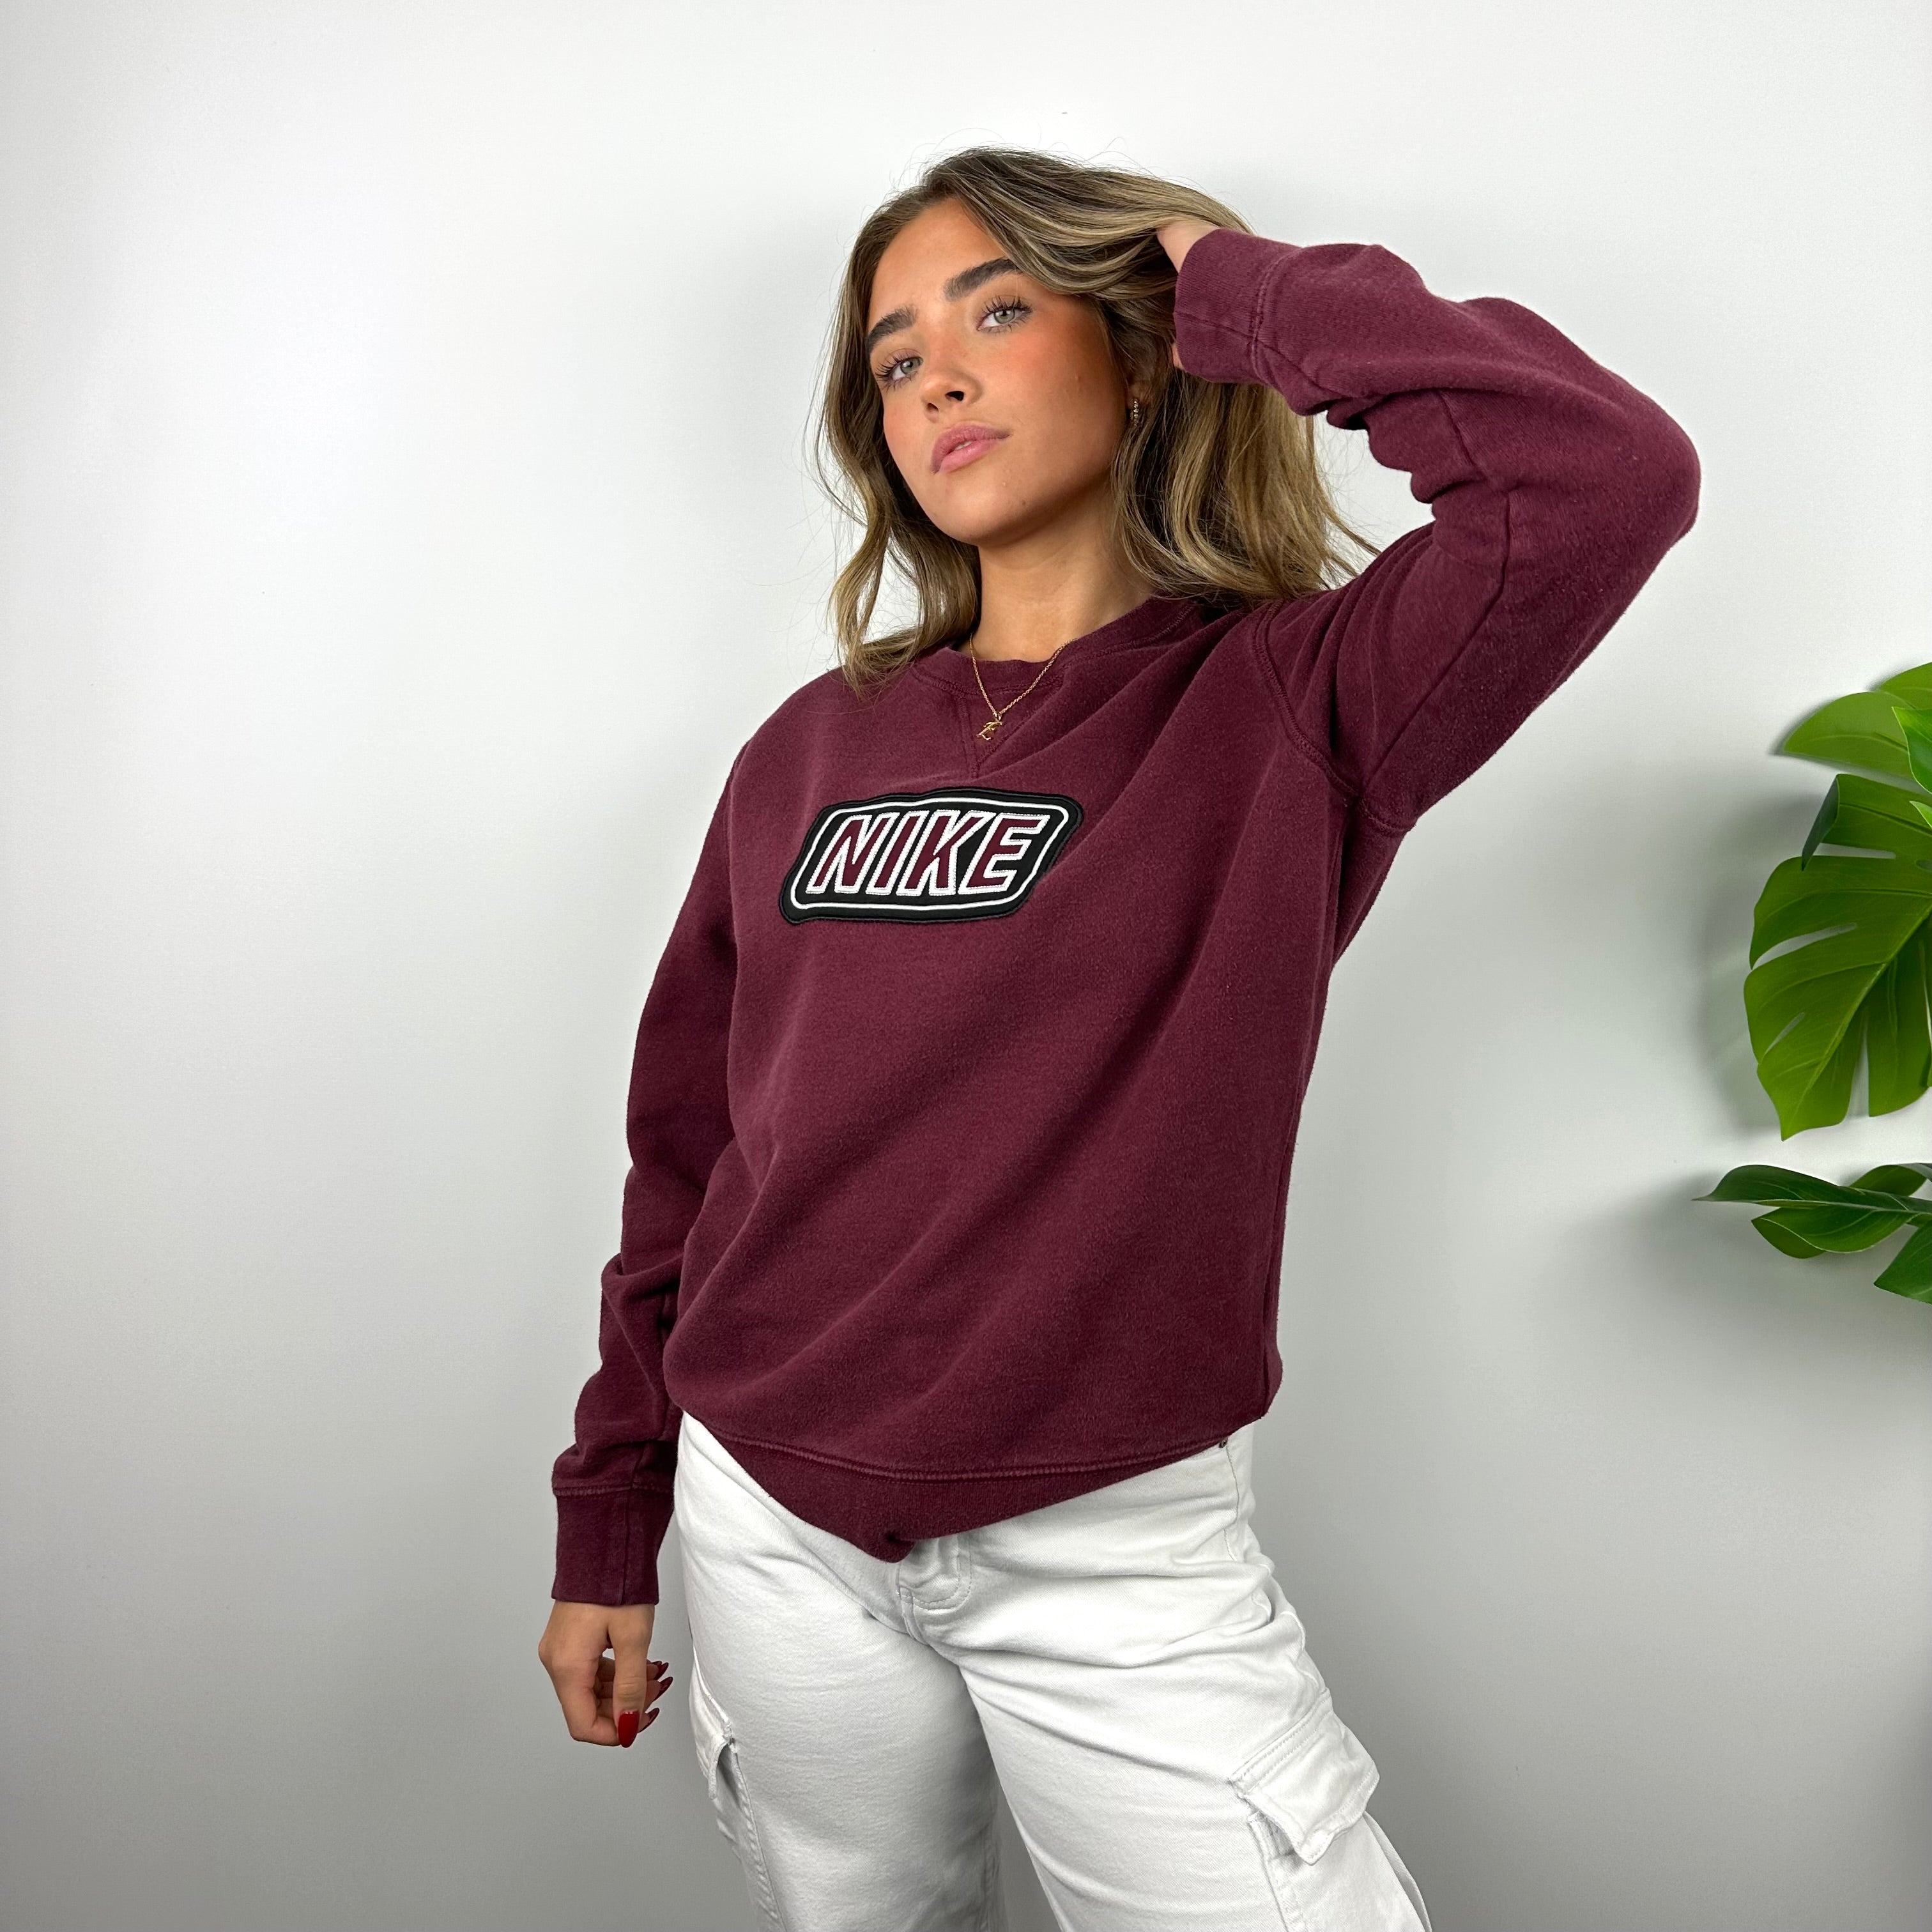 Nike Maroon Embroidered Spell Out Sweatshirt (M)